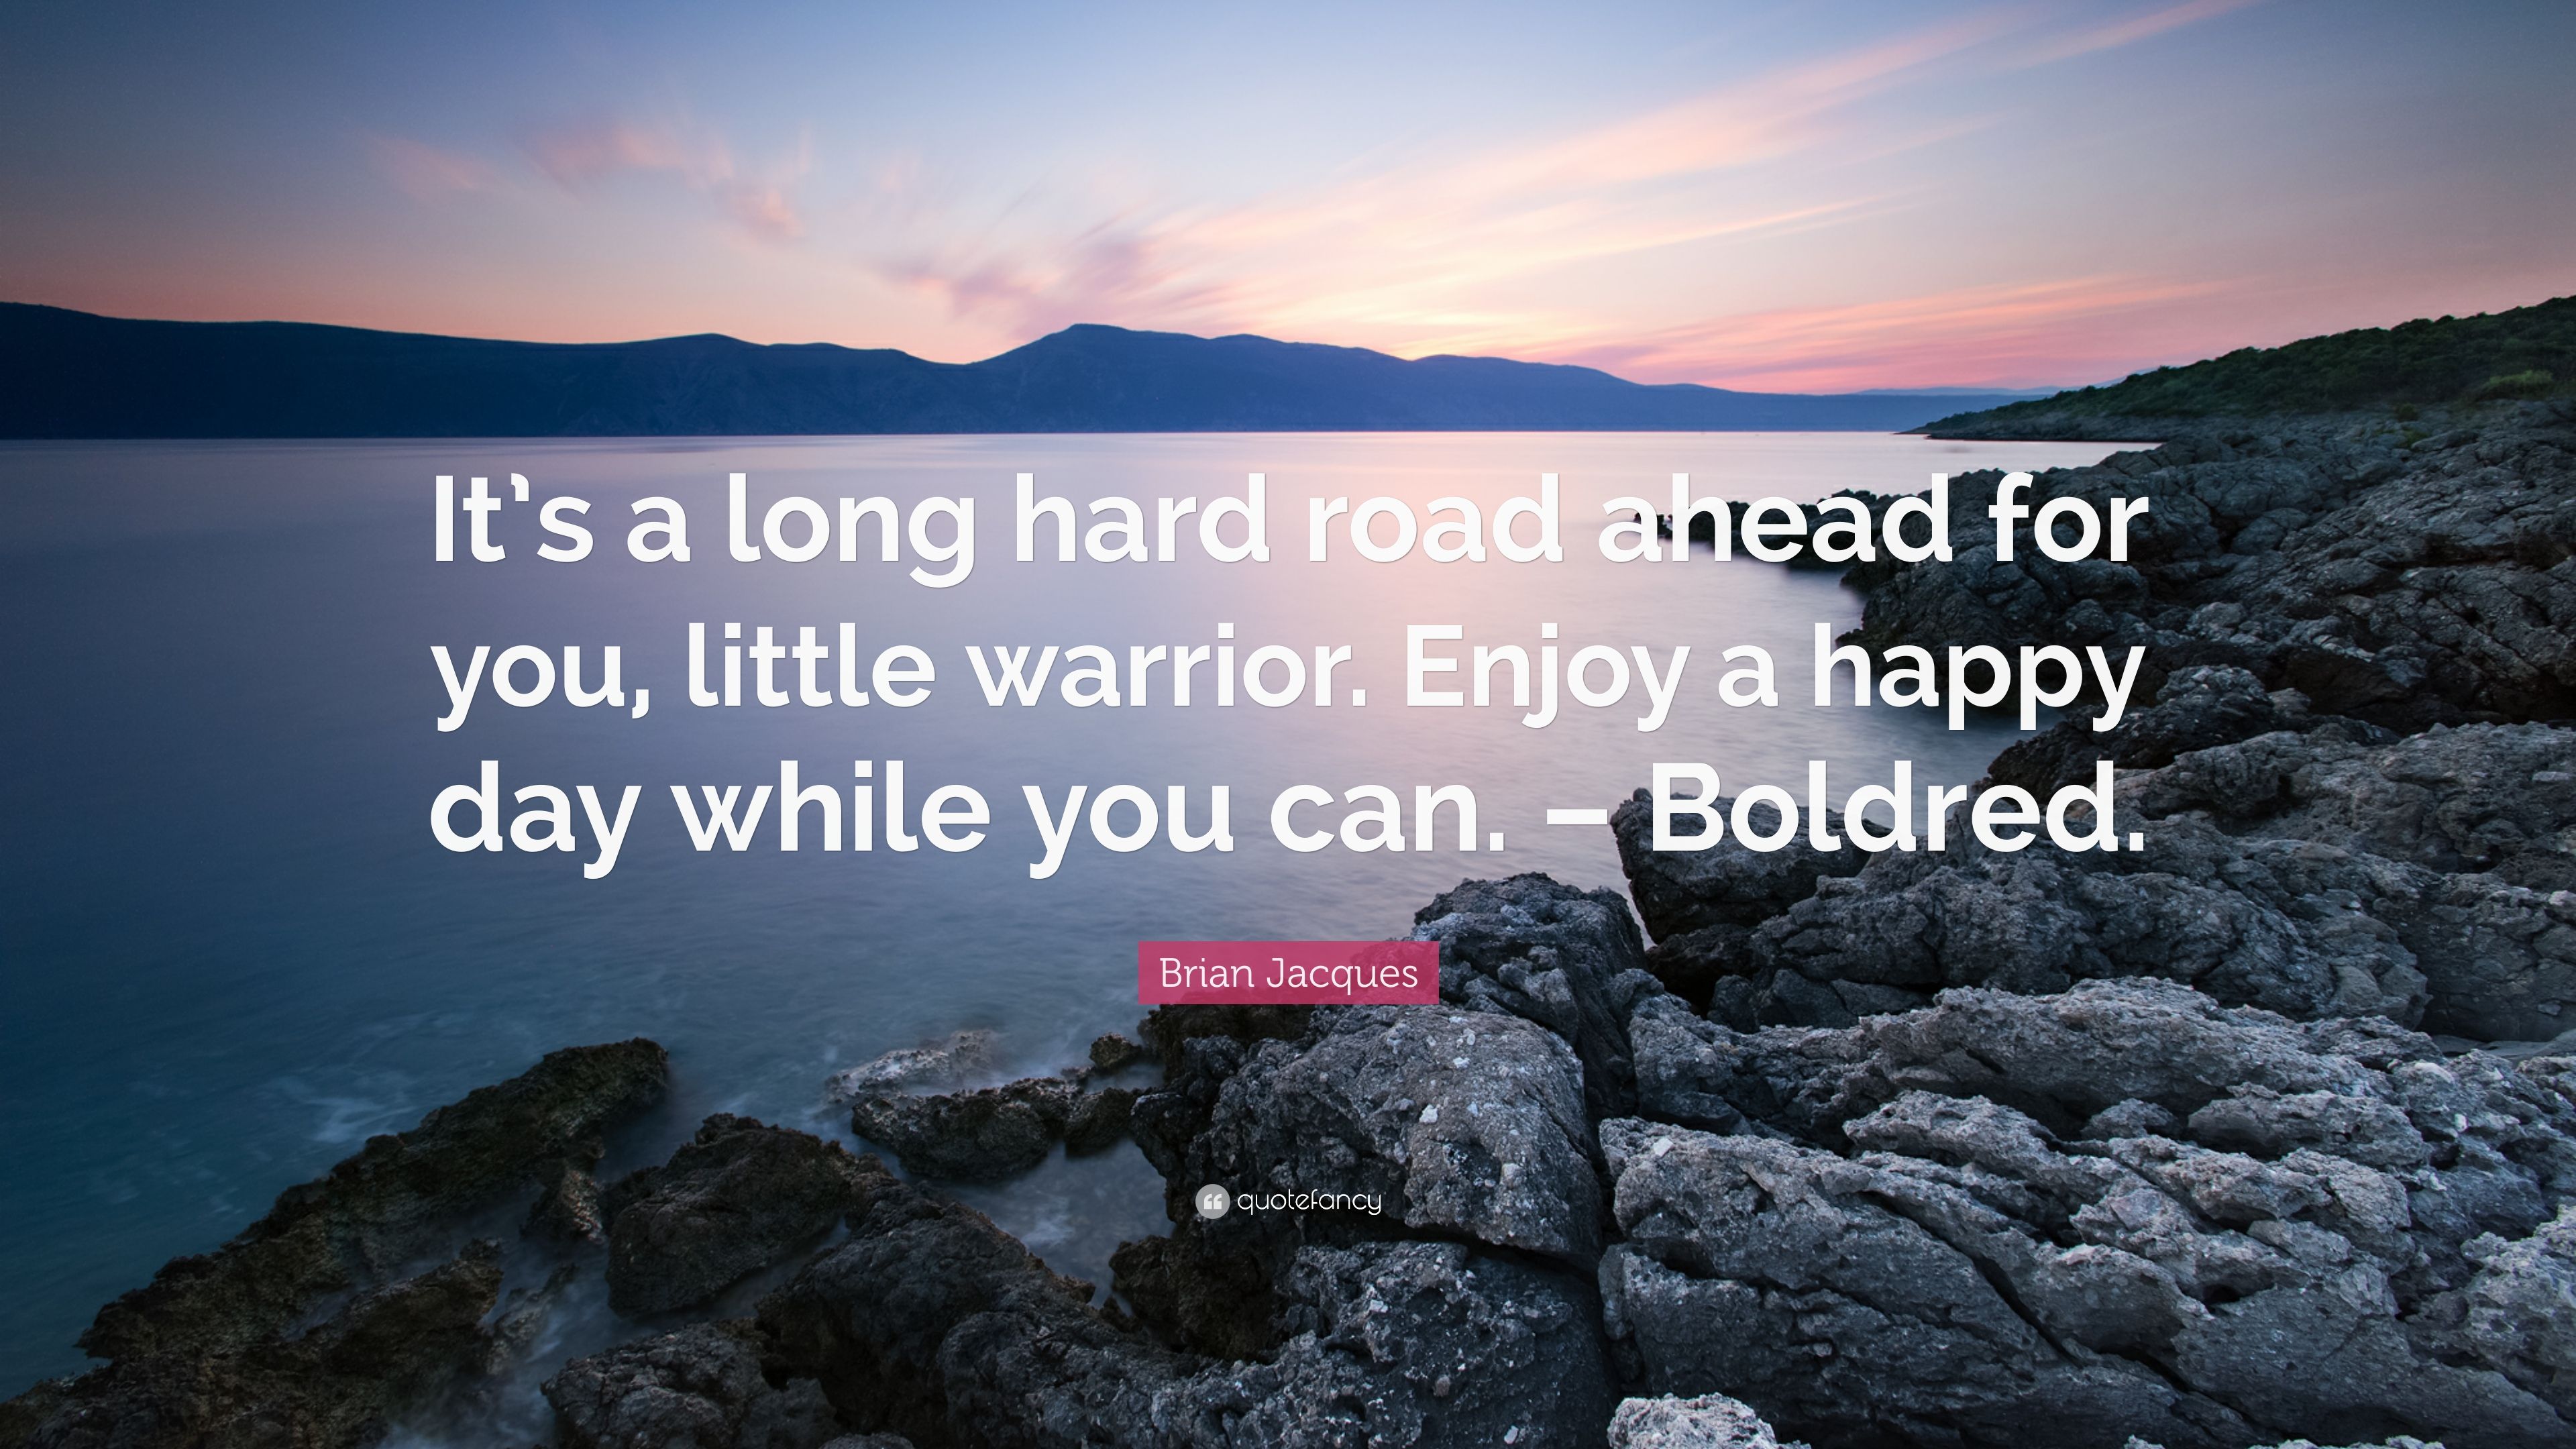 Brian Jacques Quote: “It's a long hard road ahead for you, little warrior. Enjoy a happy day while you can